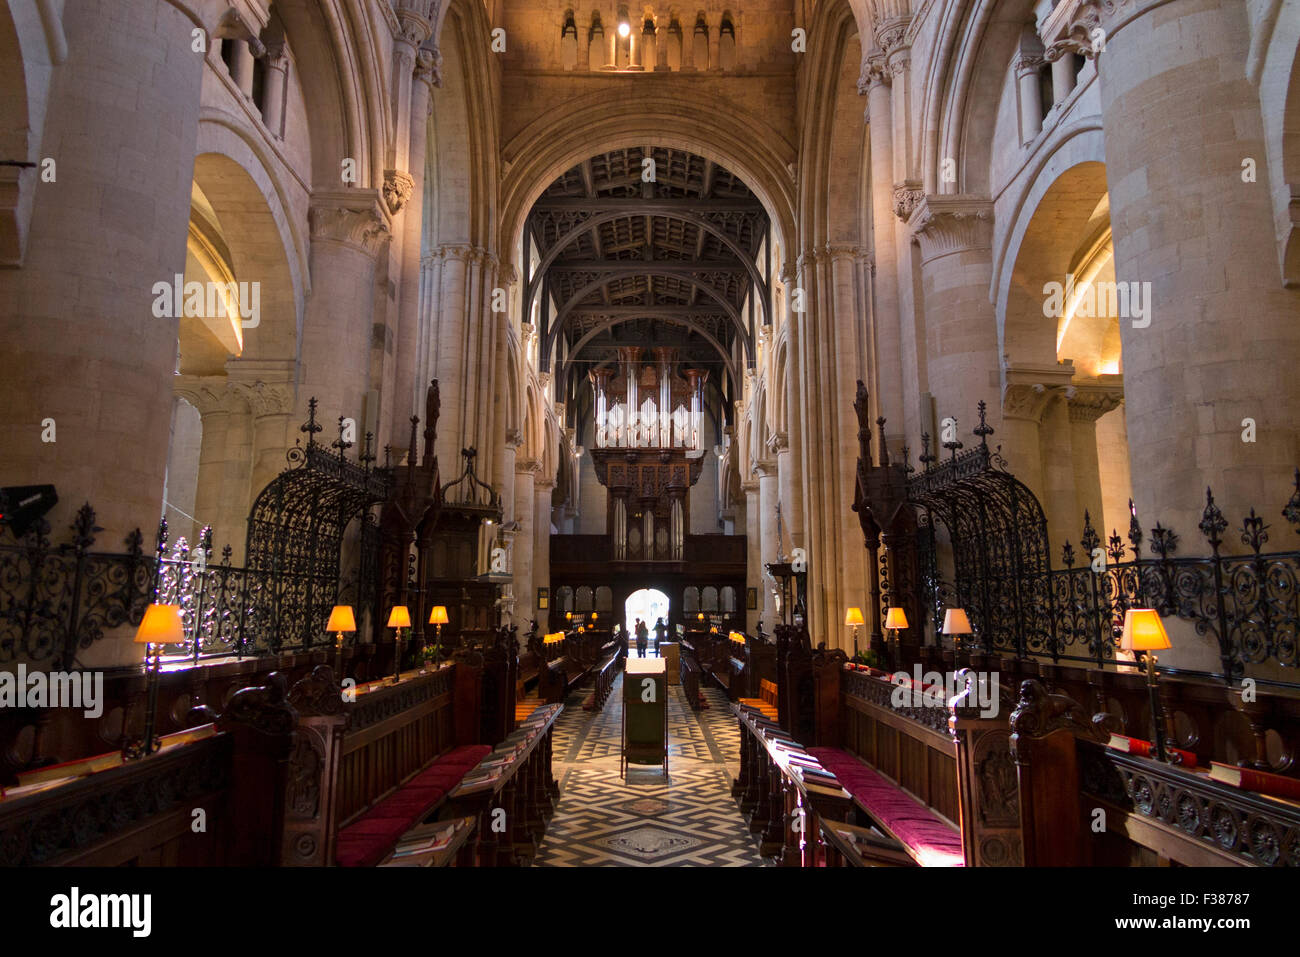 Choir stalls / seats (looking towards the Nave) at Christ Church Cathedral, Oxford University. Oxford. UK. Stock Photo